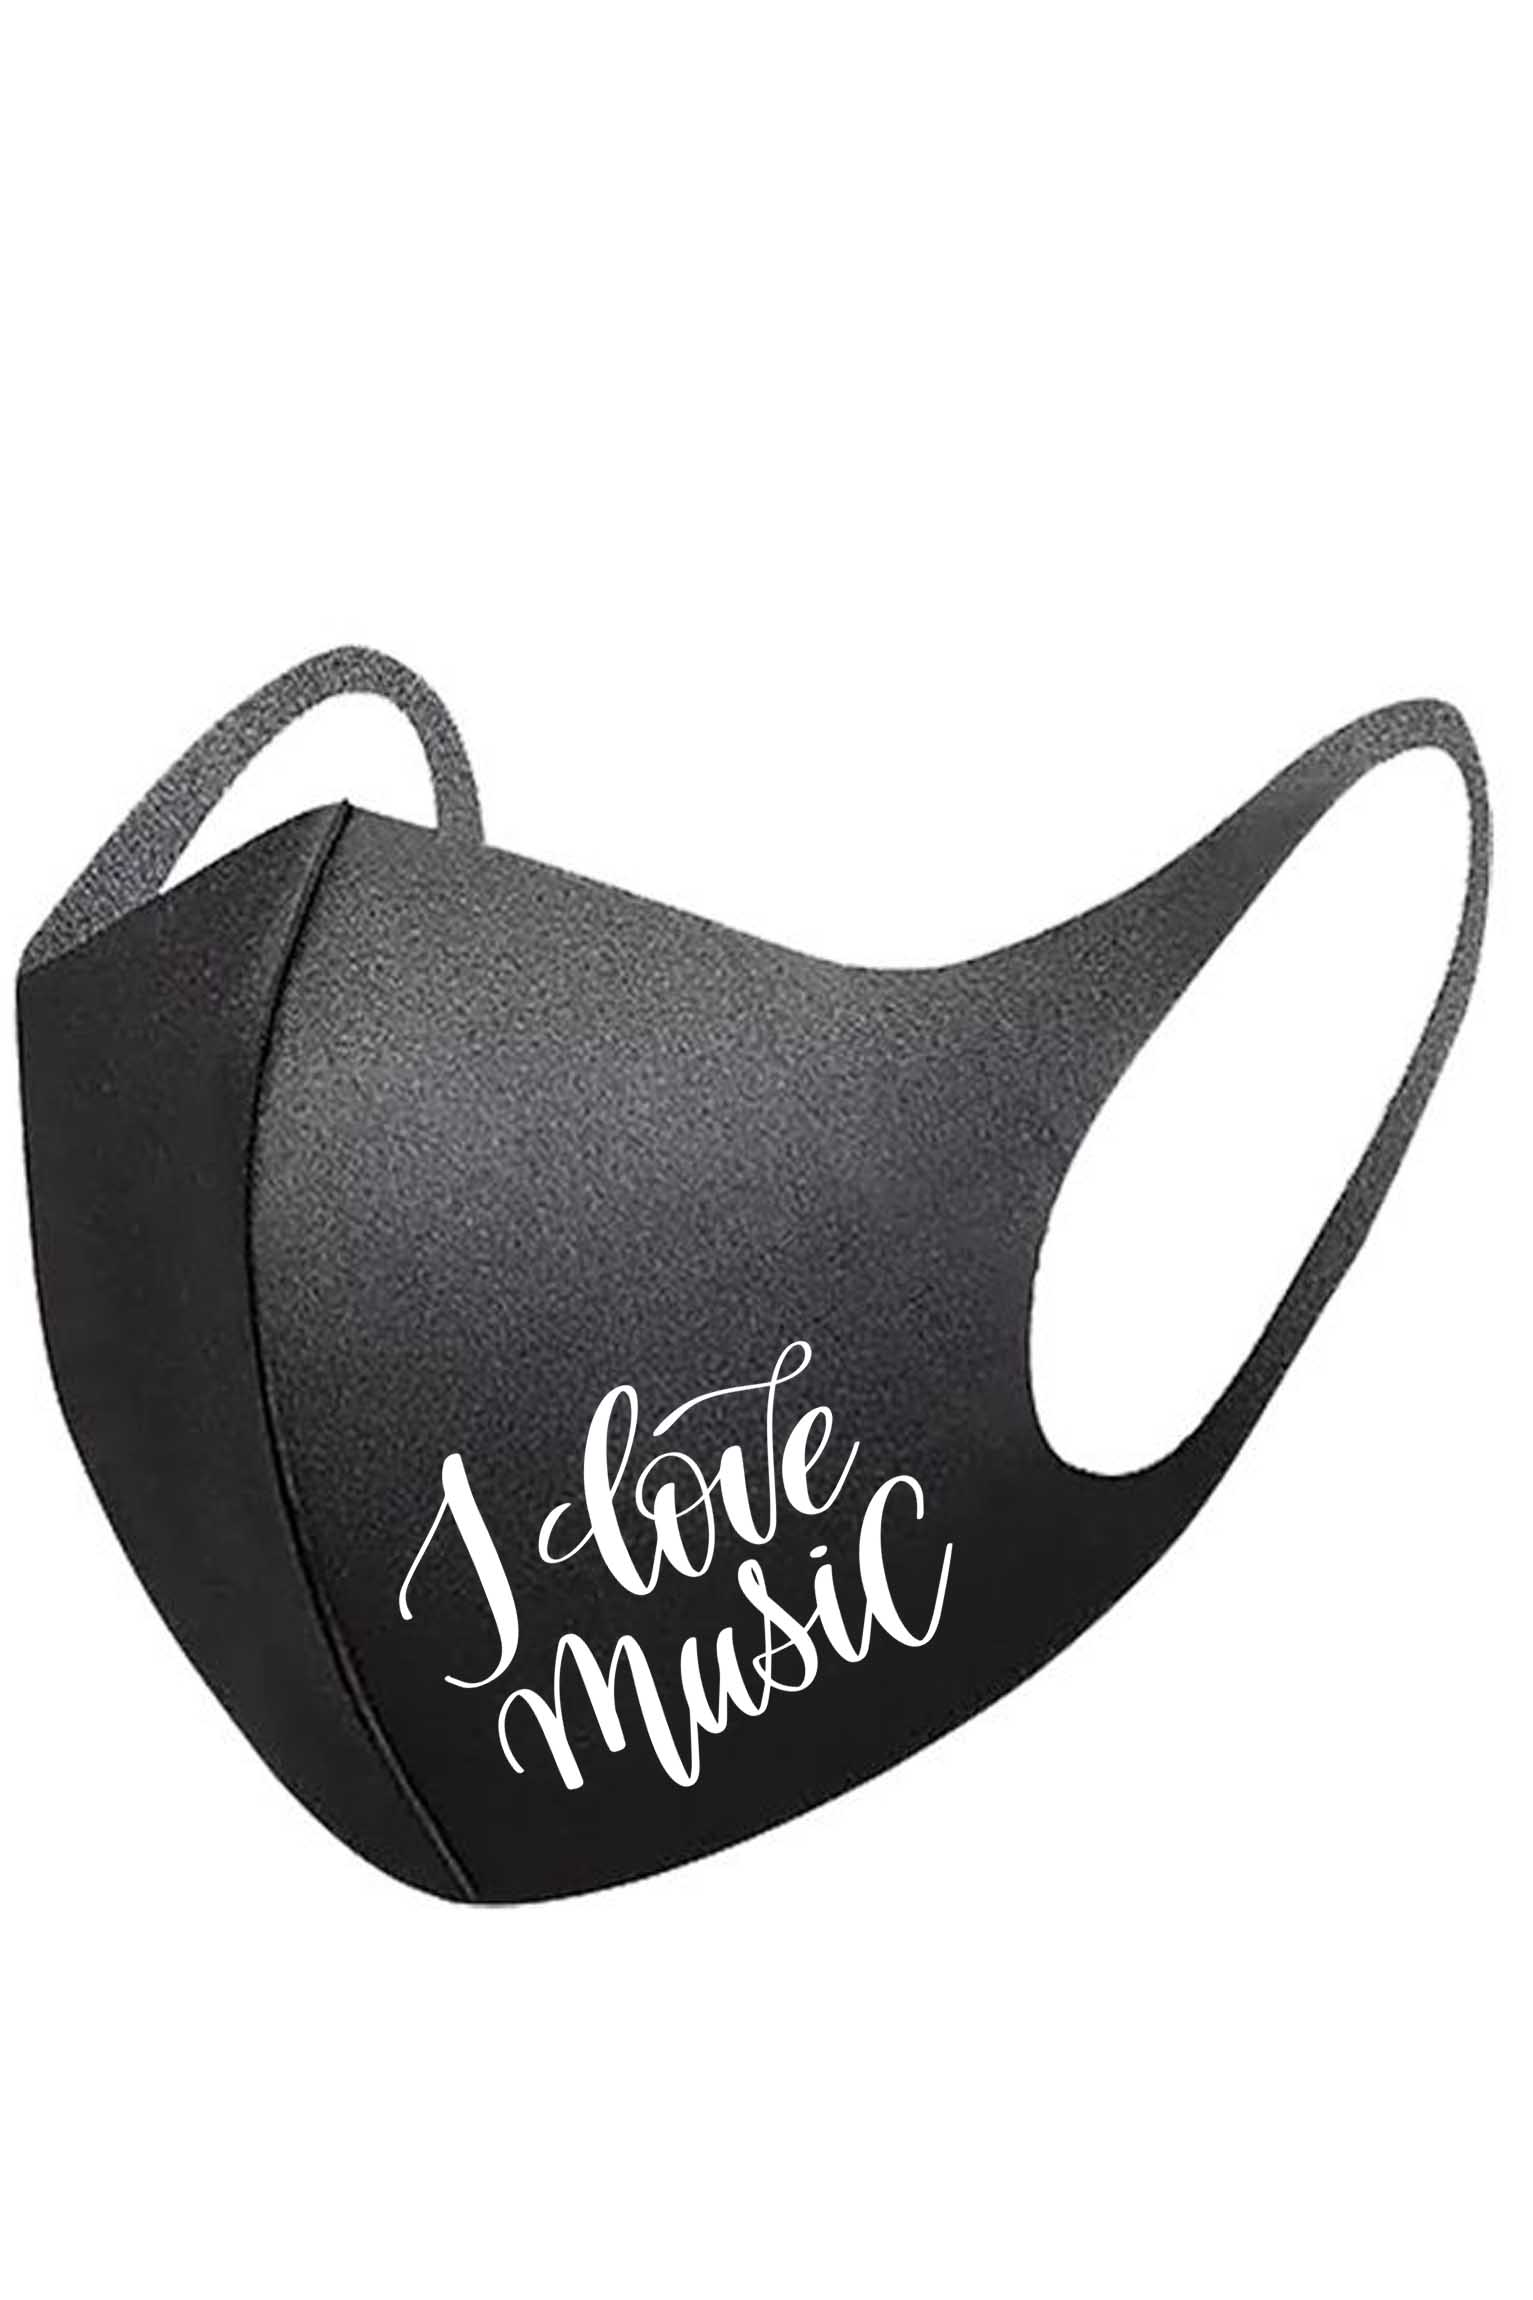 Soft Stretchable Fabric Love Music Printed Reusable Face Mask